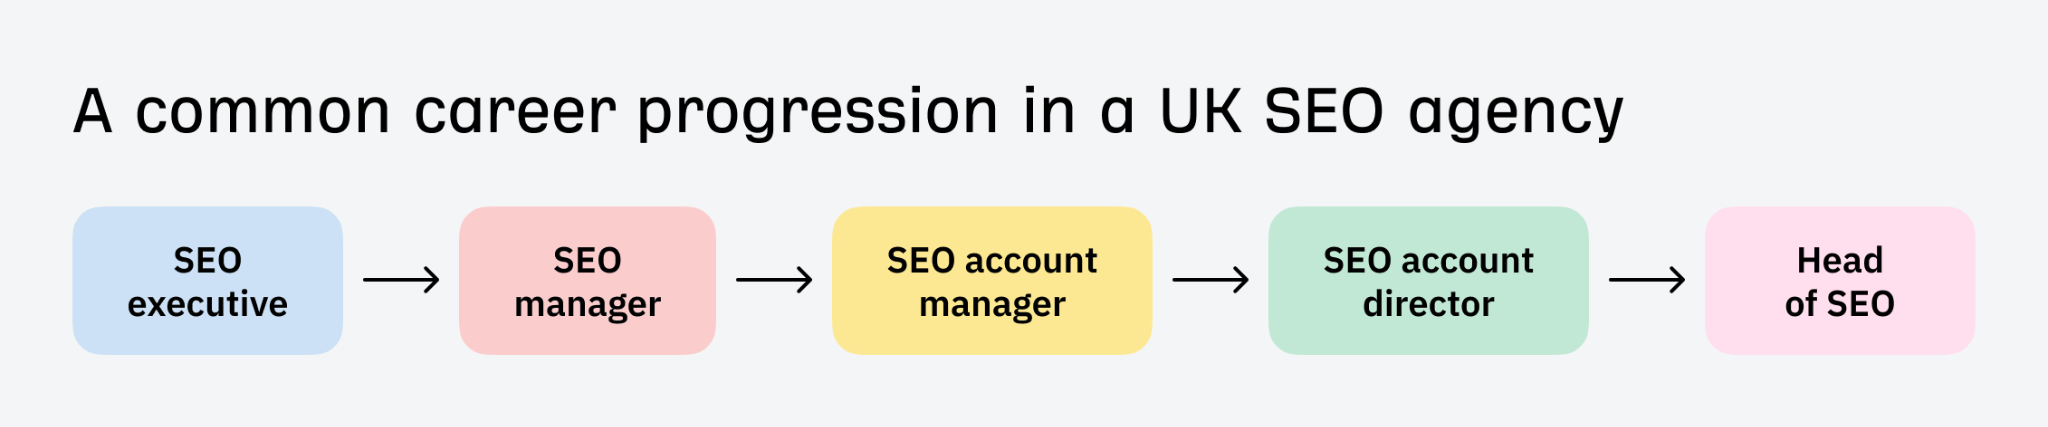 A common career progression in a UK SEO agency